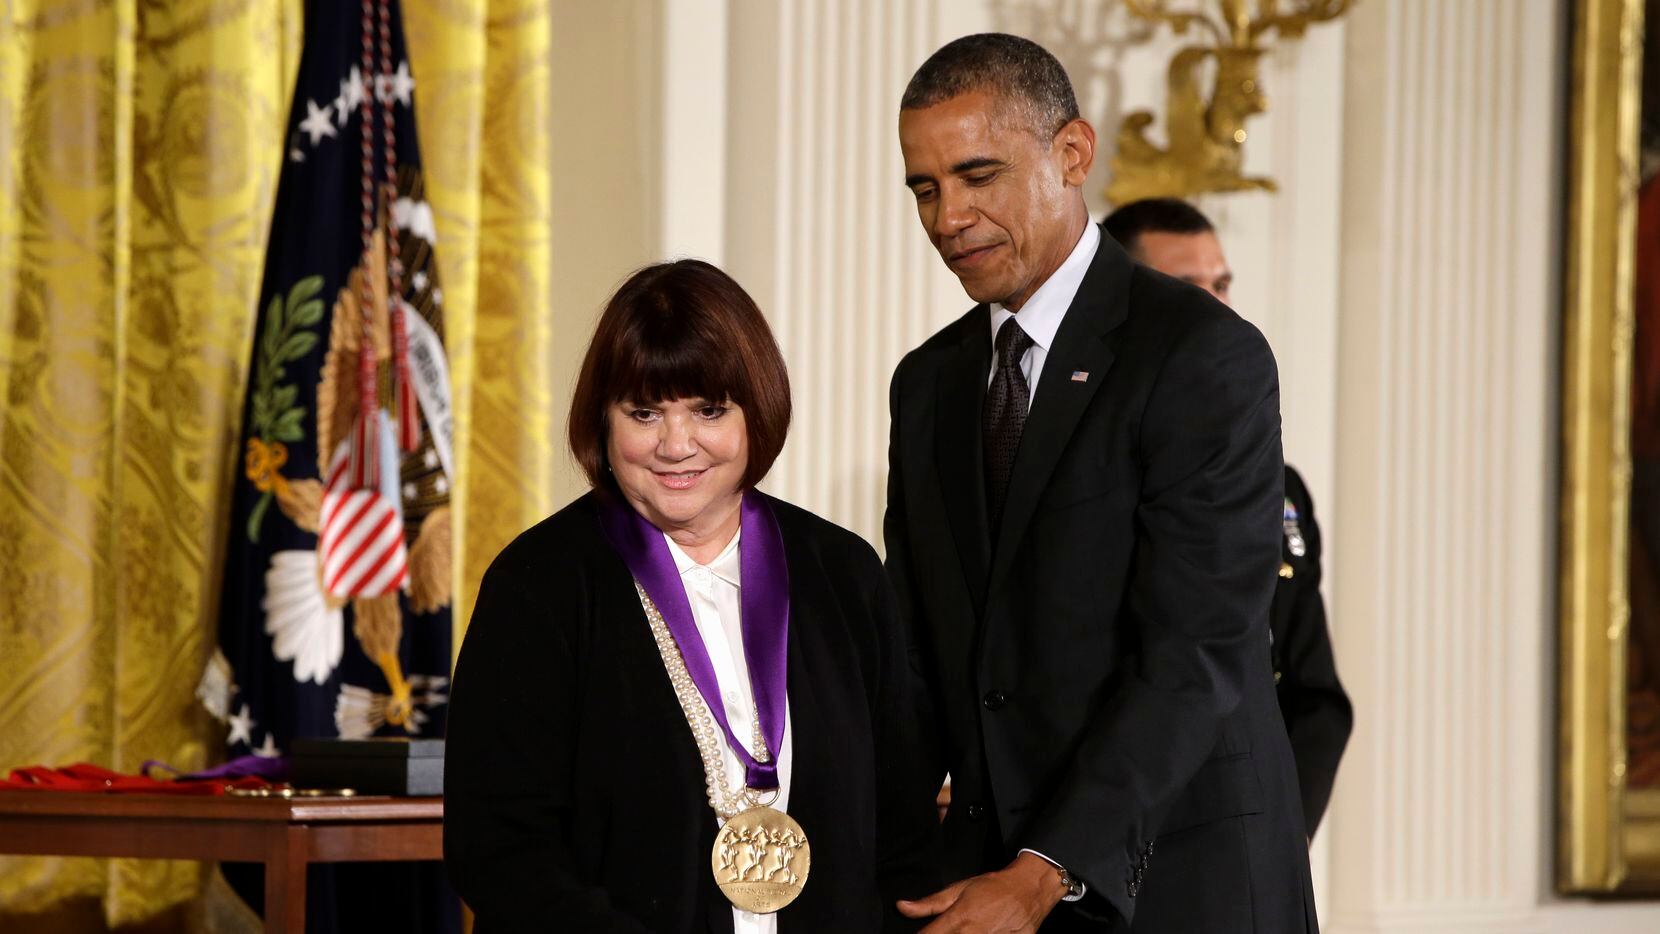 President Barack Obama helps singer Linda Ronstadt off stage in the East Room of the White...